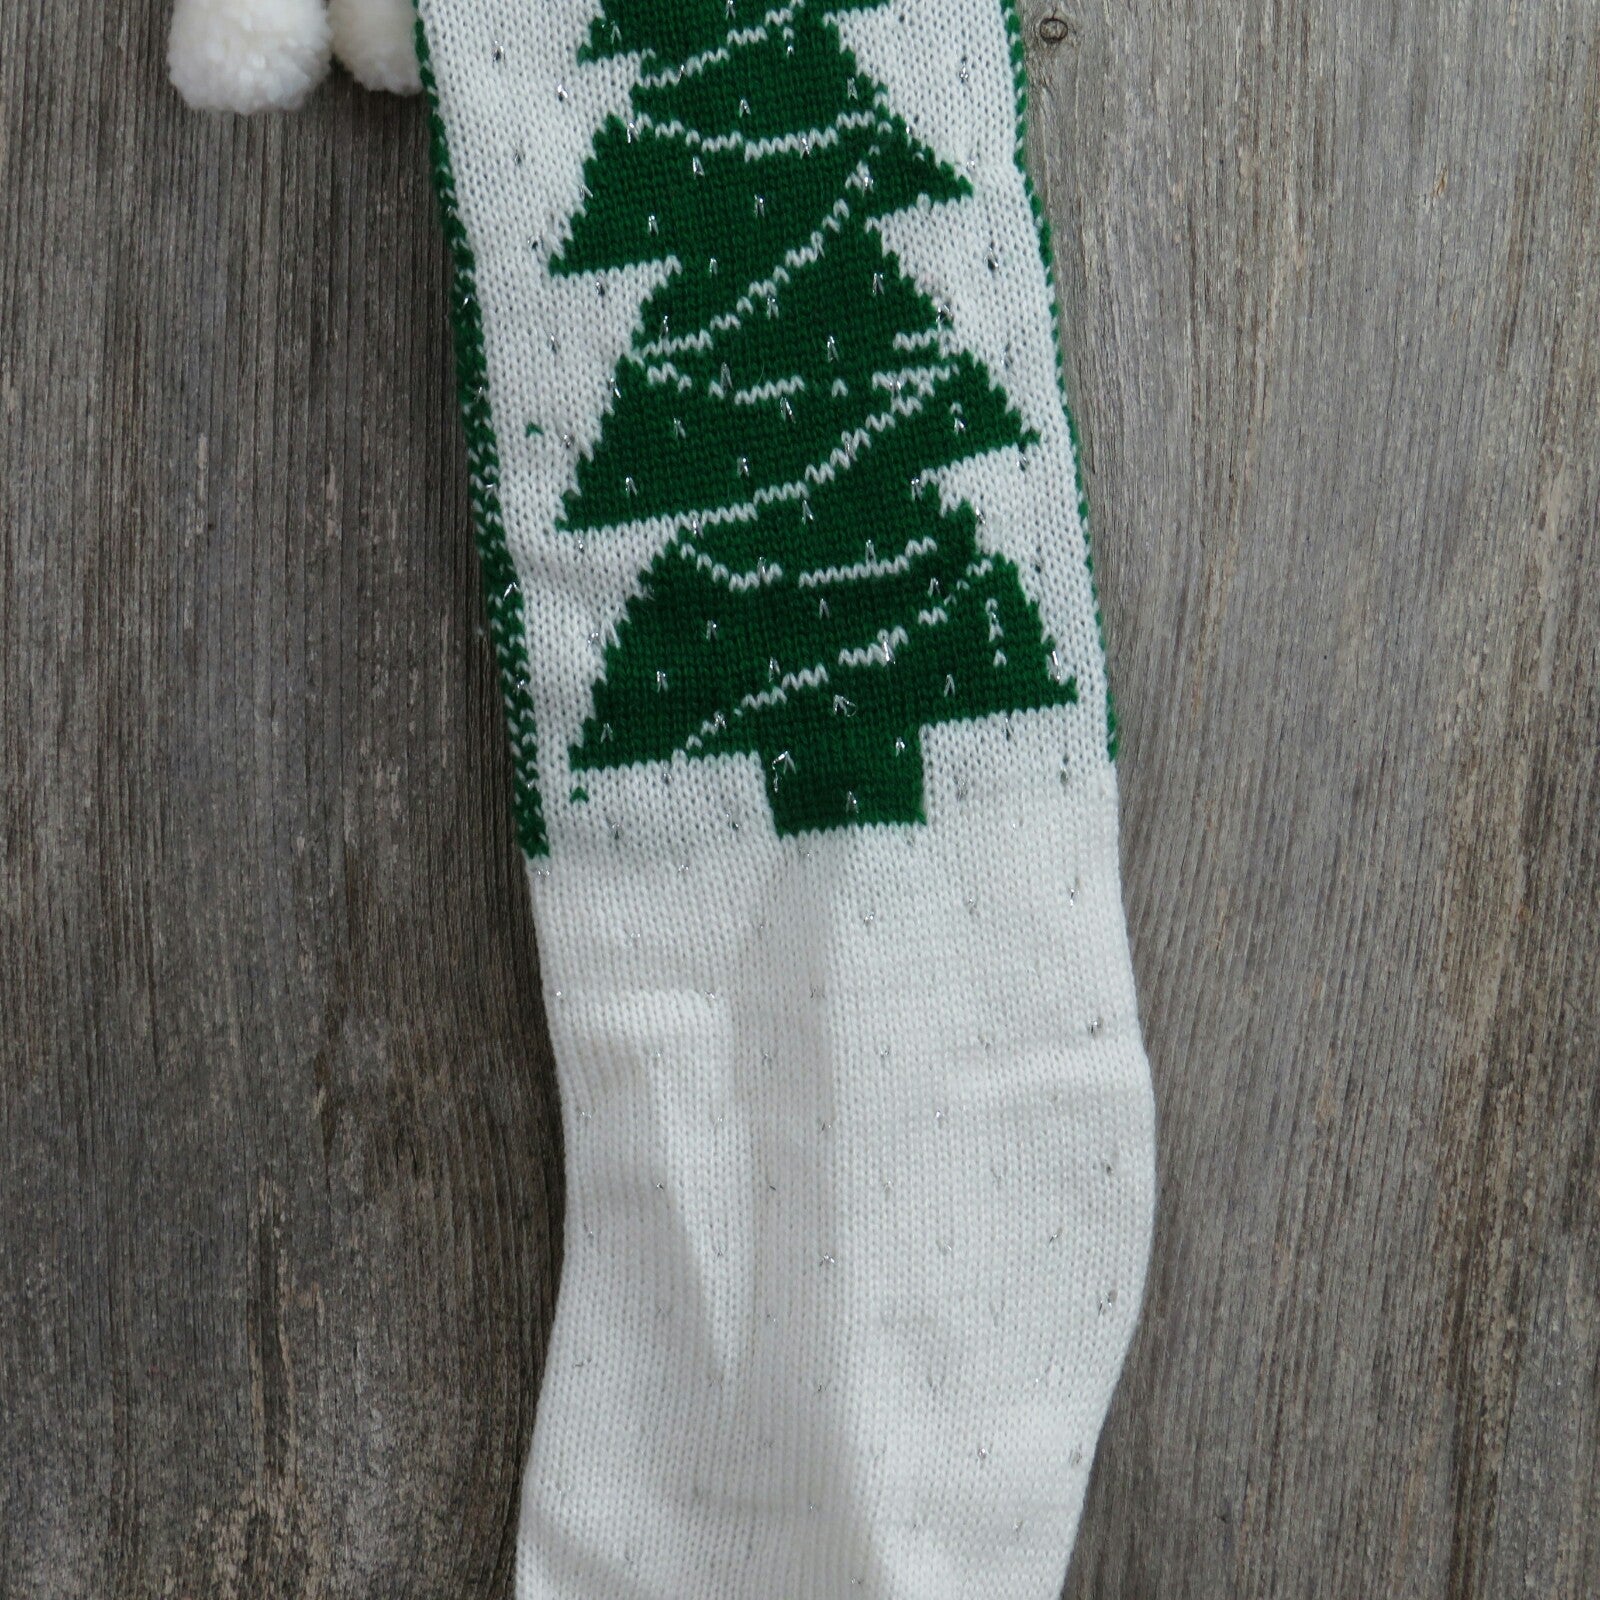 Vintage Christmas Tree Stocking Knit Green White Pom Poms Knitted Silver Holiday Decor 1980s - At Grandma's Table